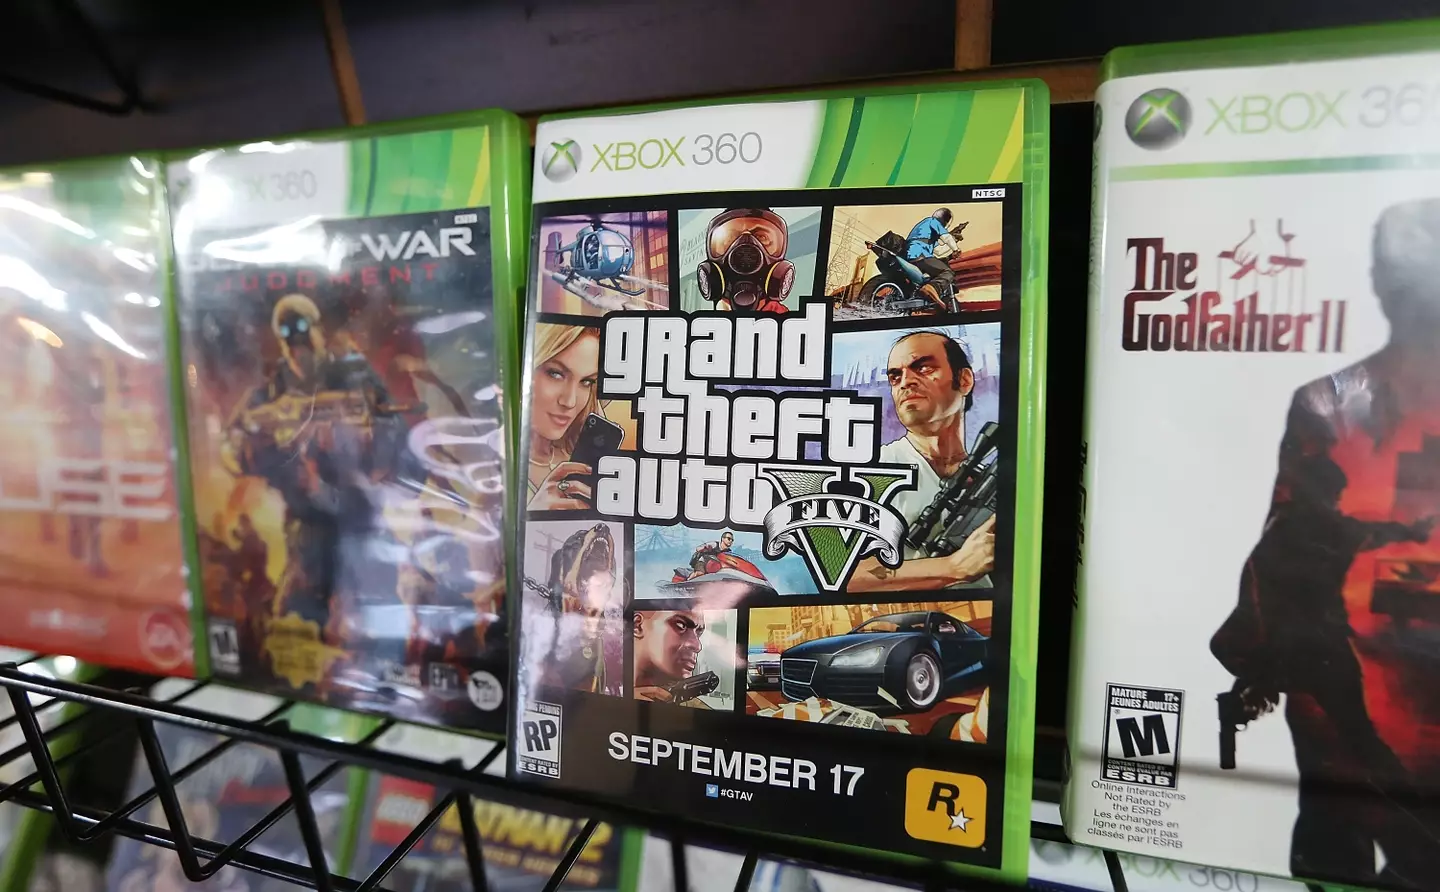 Grand Theft Auto V is the best-selling console and PC game of all time. Character: Mario Tama/Getty Images